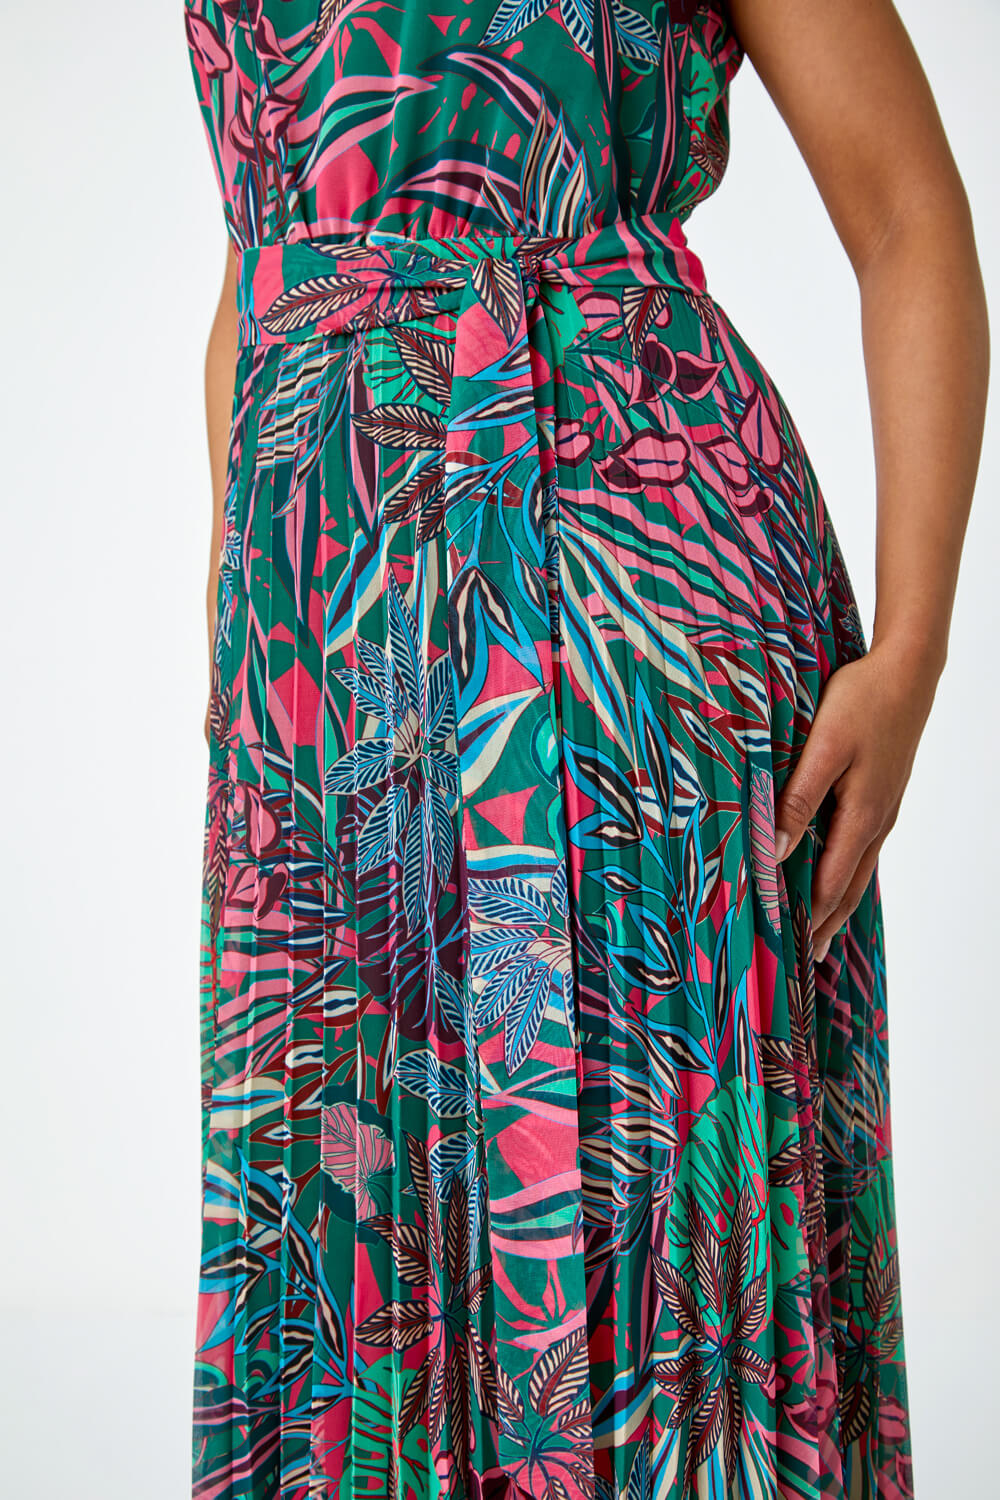 Green Petite Floral Pleated Chiffon Maxi Dress, Image 5 of 5